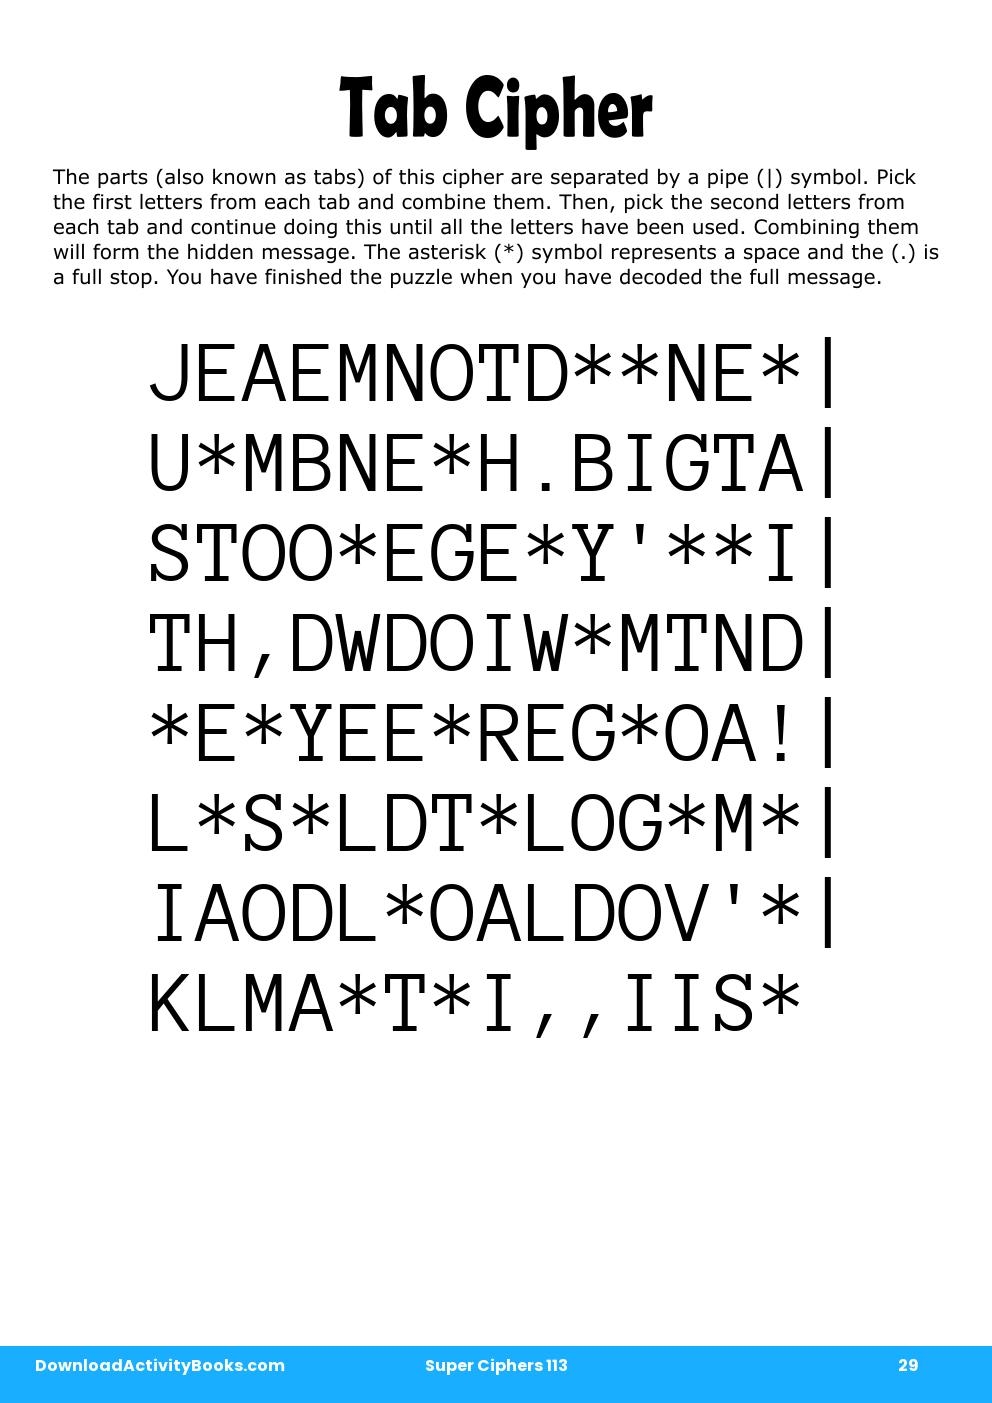 Tab Cipher in Super Ciphers 113